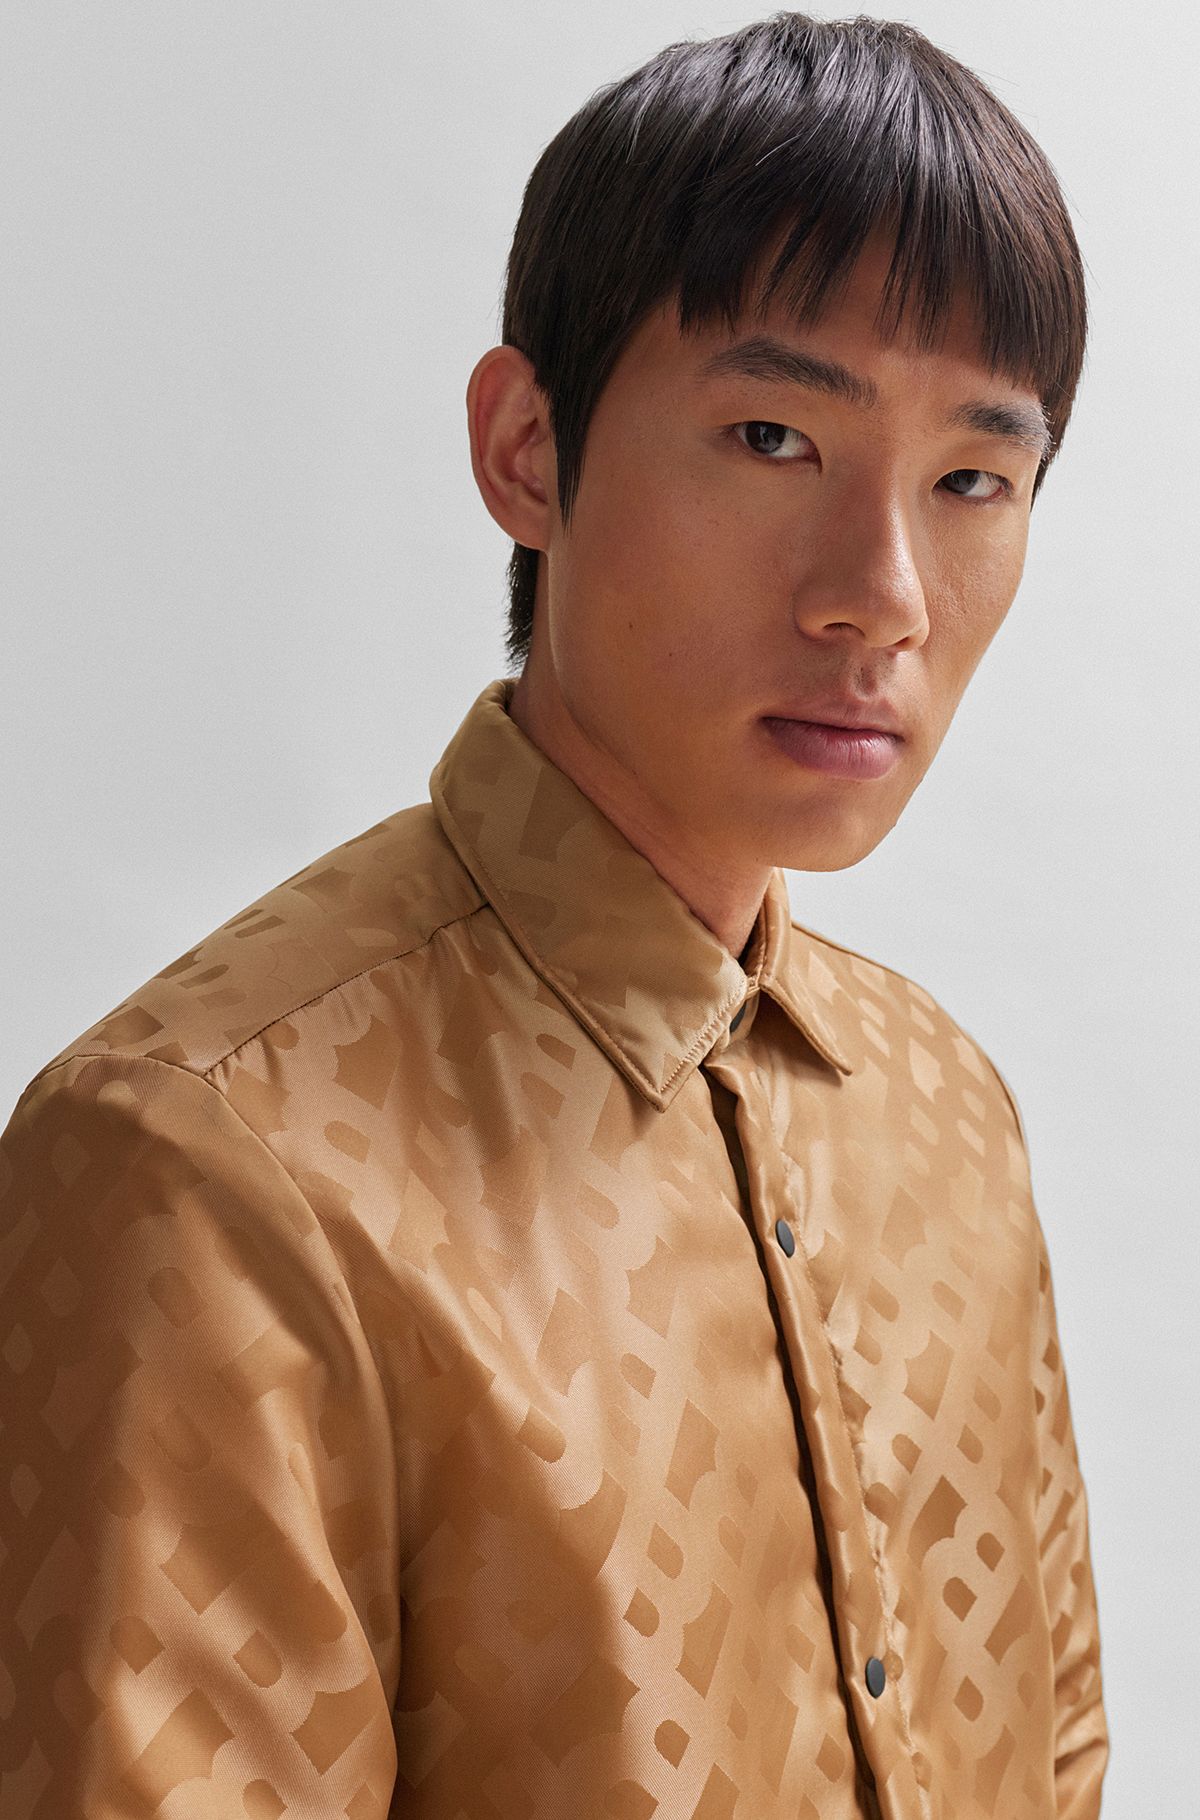 HUGO Casual in Beige BOSS Shirts by |